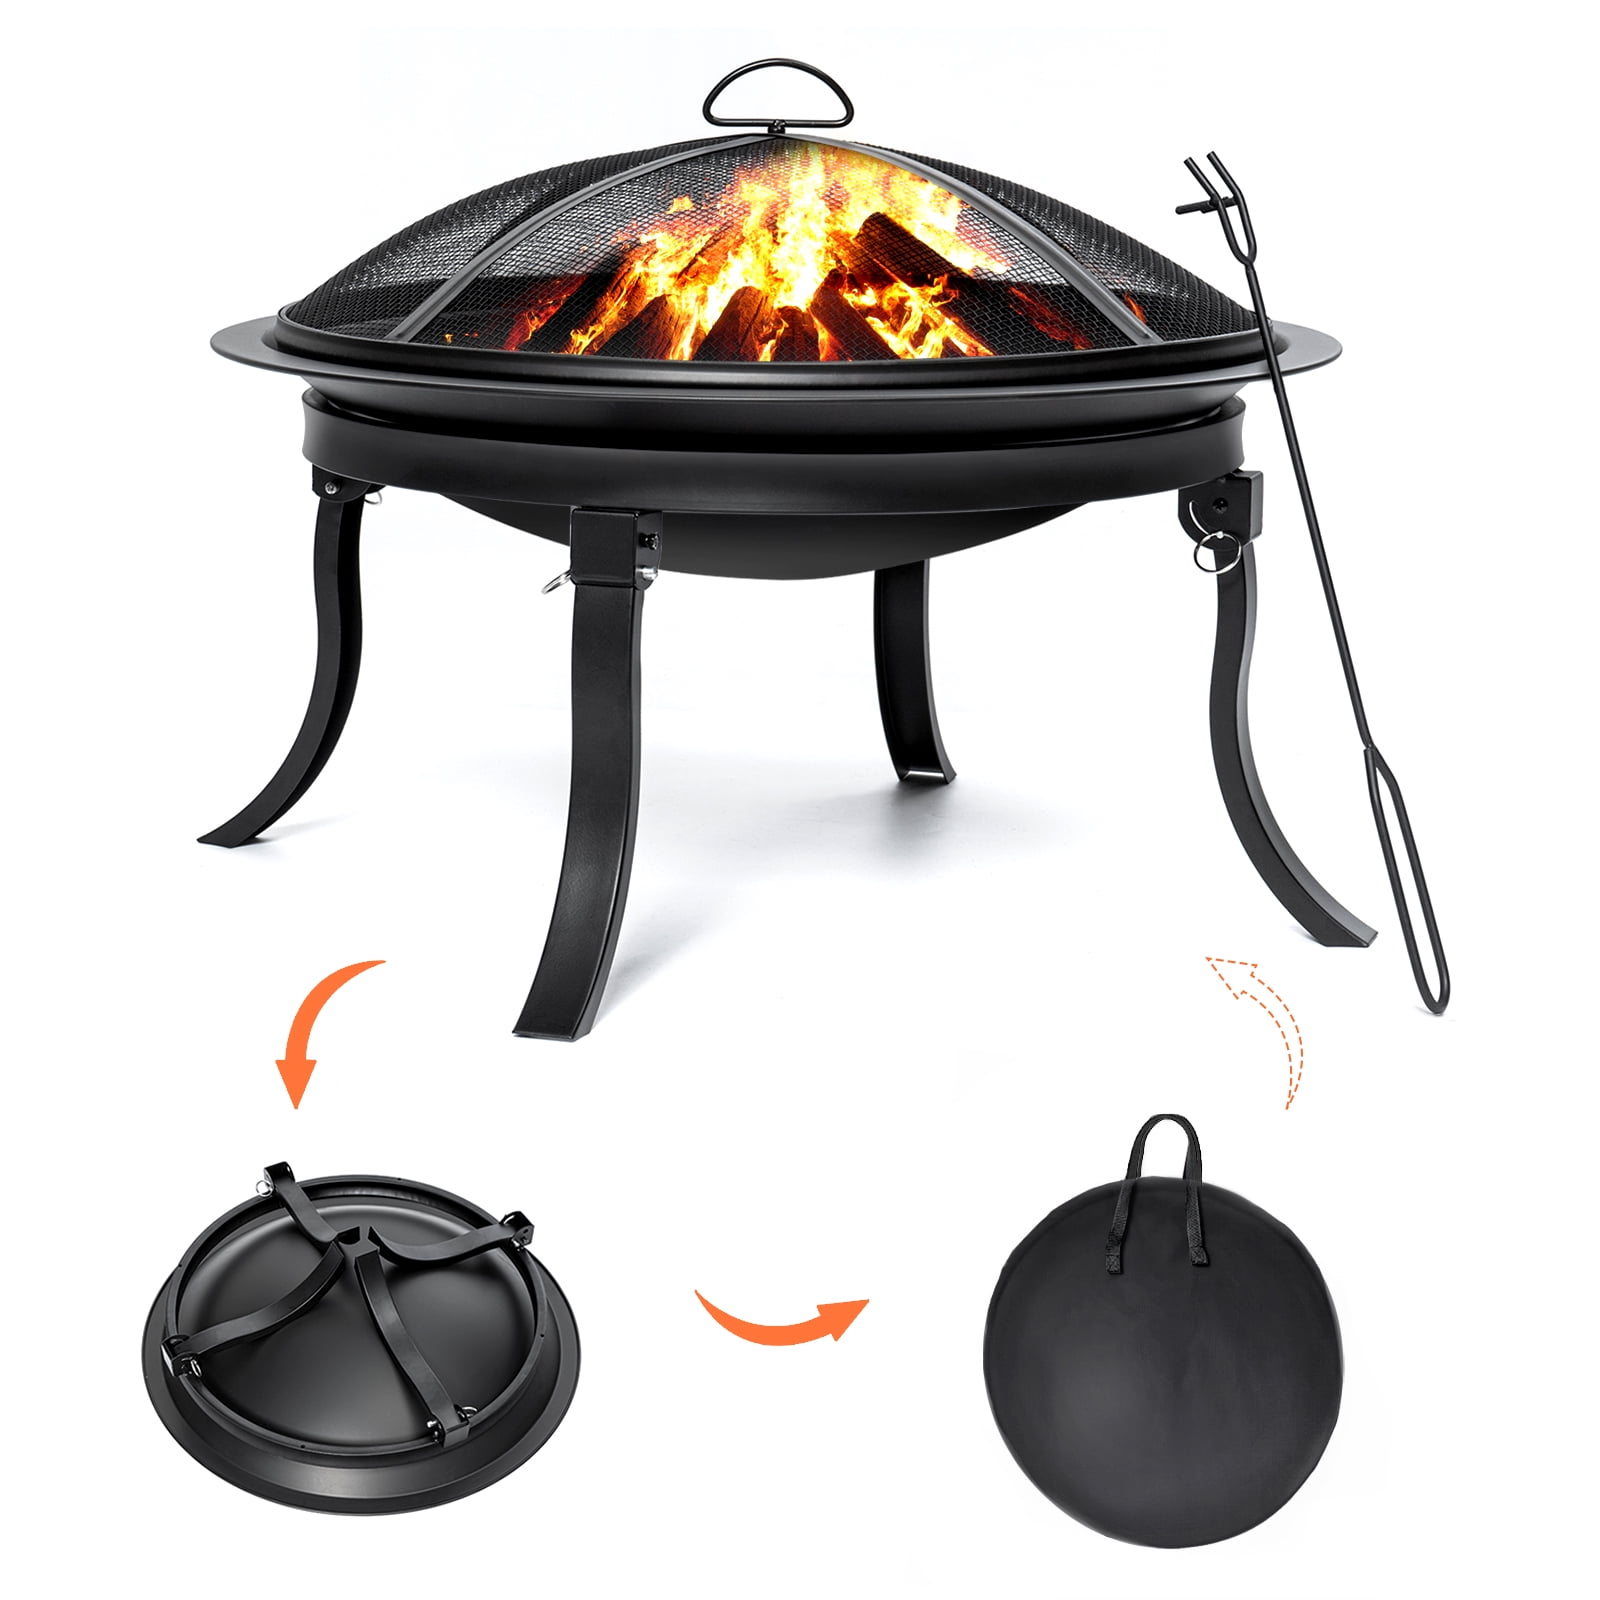 Steel Fire Pit Portable Wood Charcoal Camping Carrying Case Campfire Compact